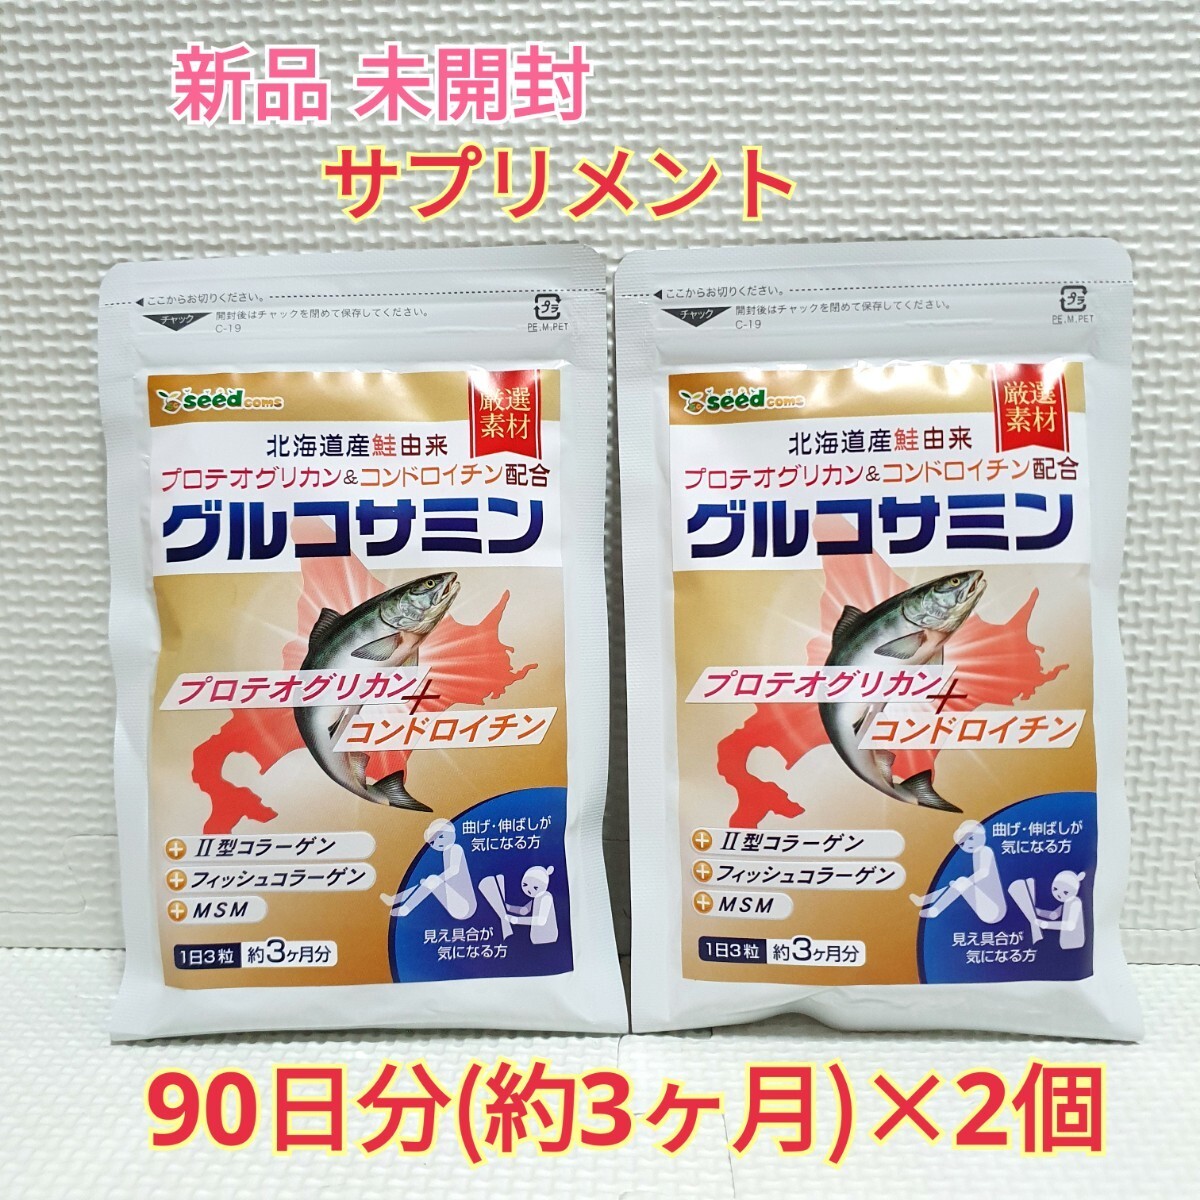  free shipping new goods Pro teo Gris can & chondroitin combination glucosamine si-do Coms 6 months supplement diet support 